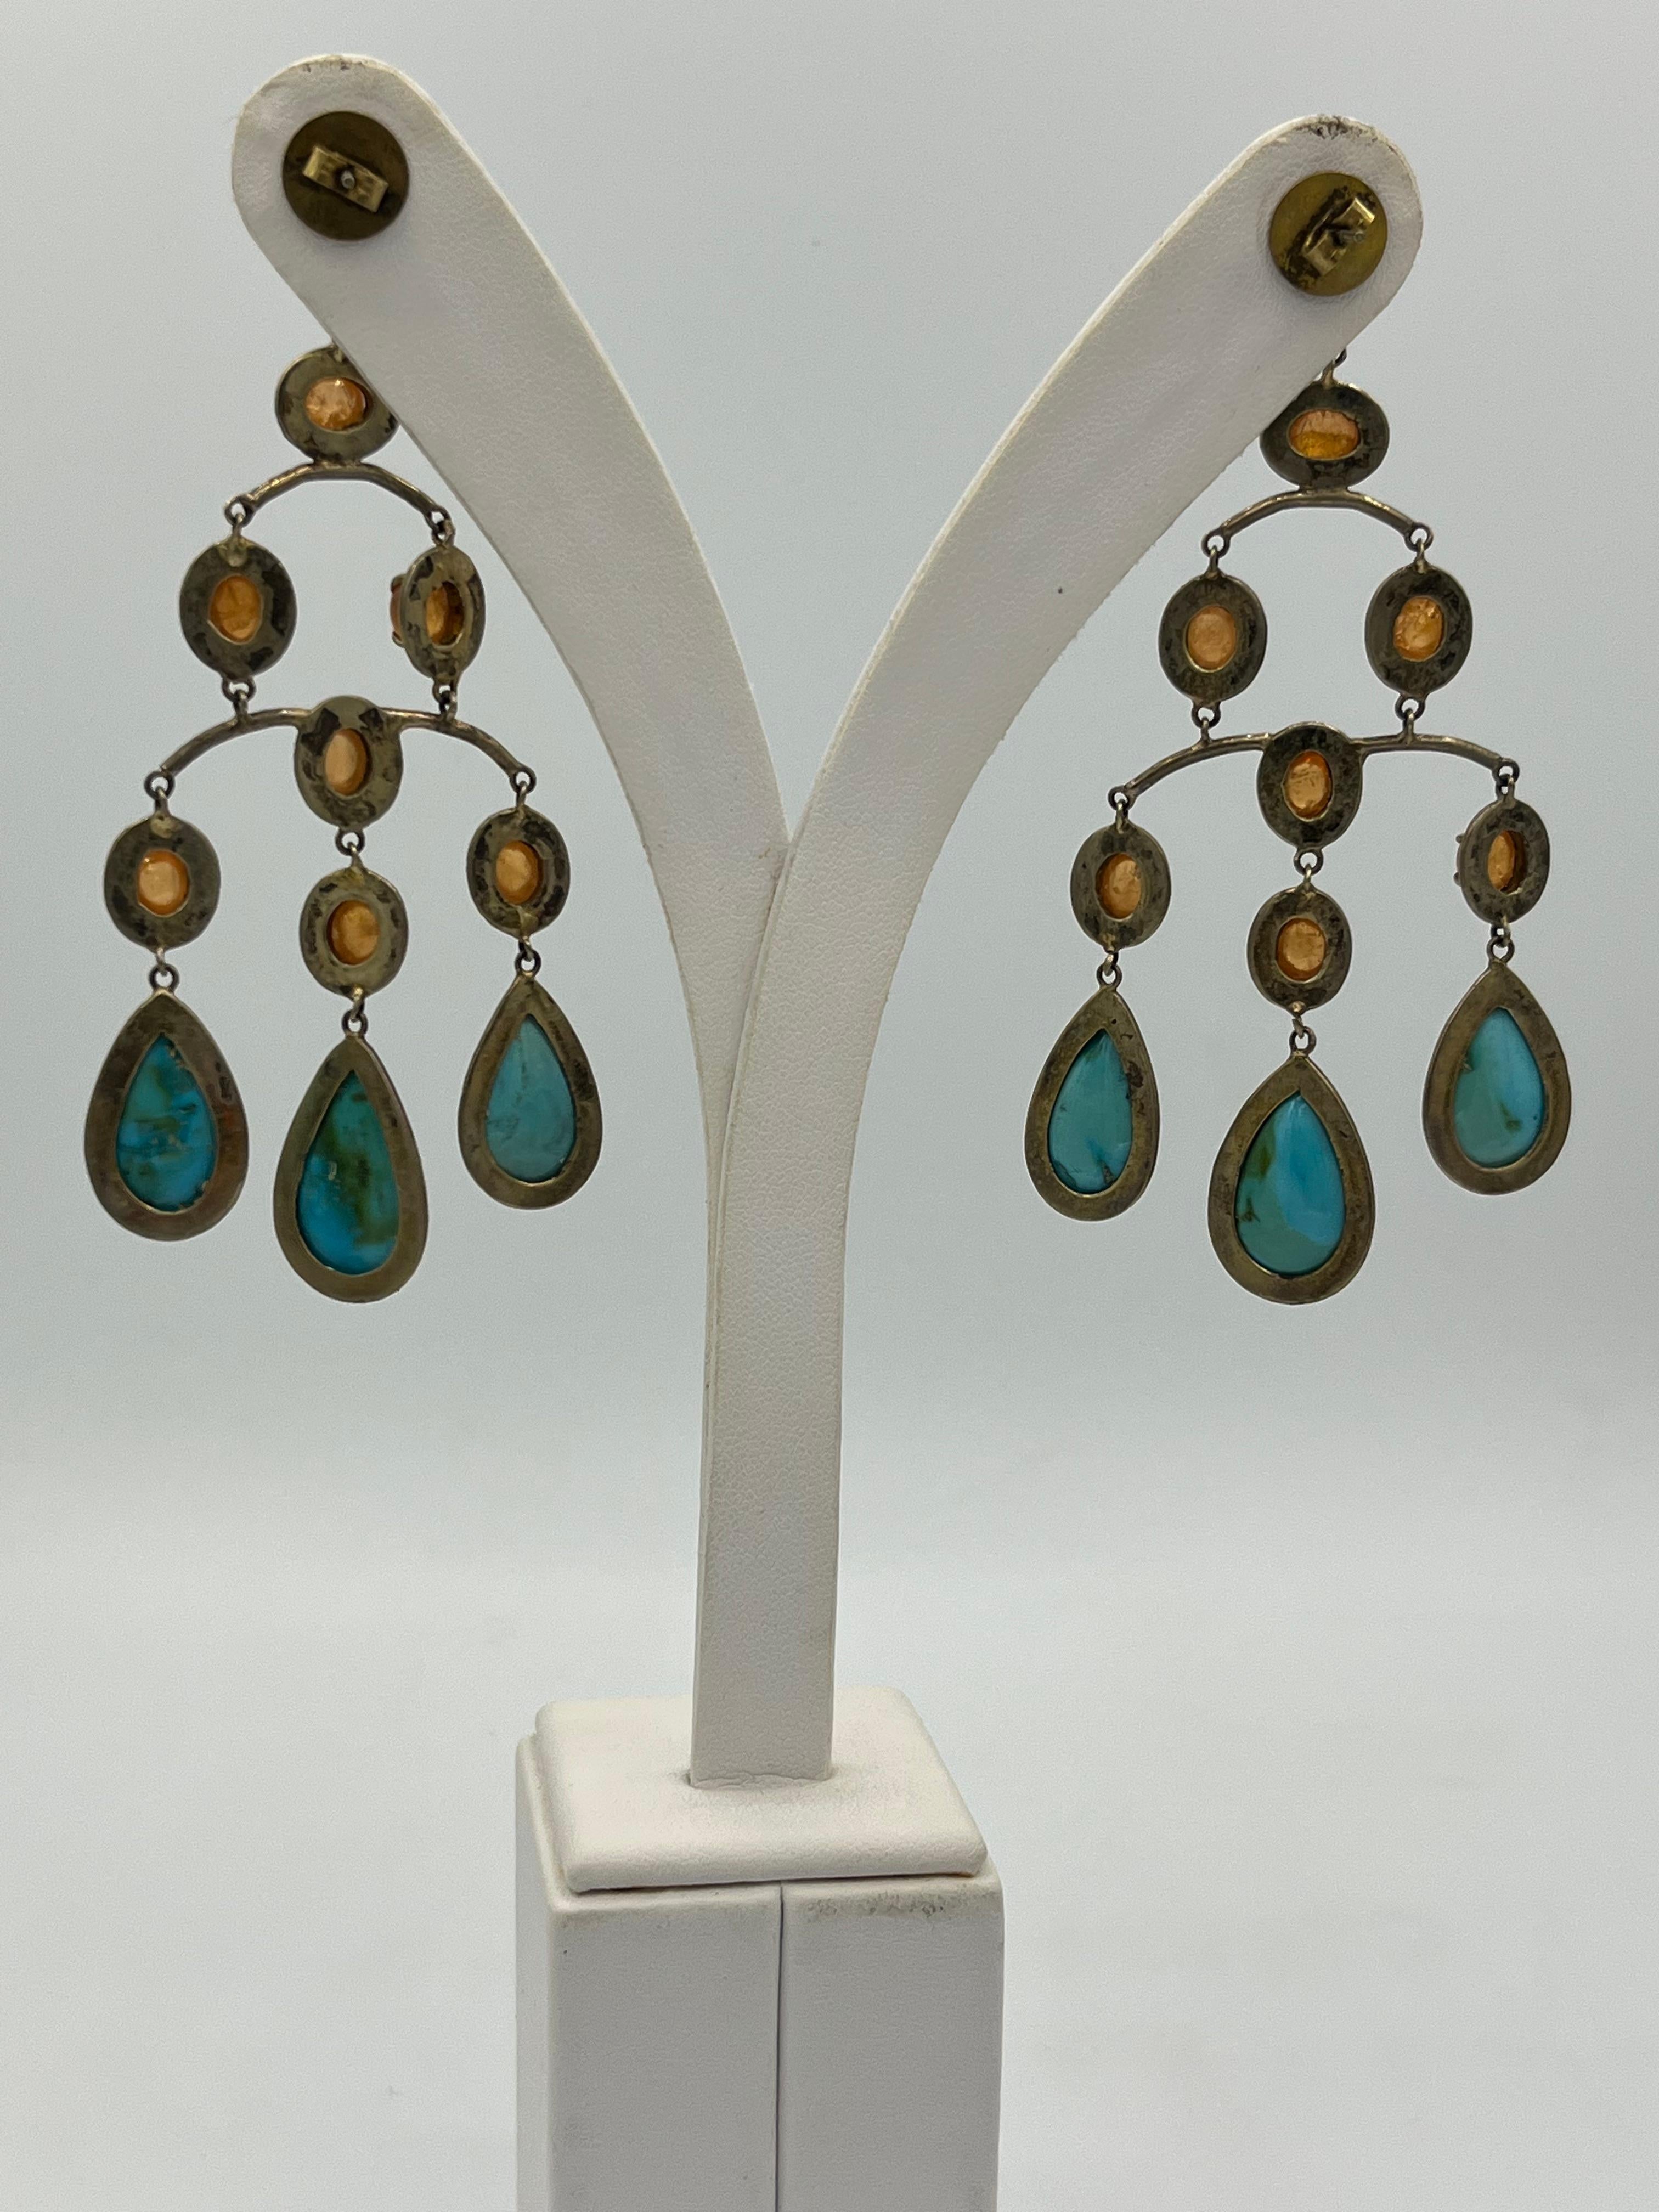 Silver gold plated
Turquoise
Amber
10 cm long
38,4 gram
This earrings are fully mobile, the stones are in cabuchon cut, the turquoise in trop form